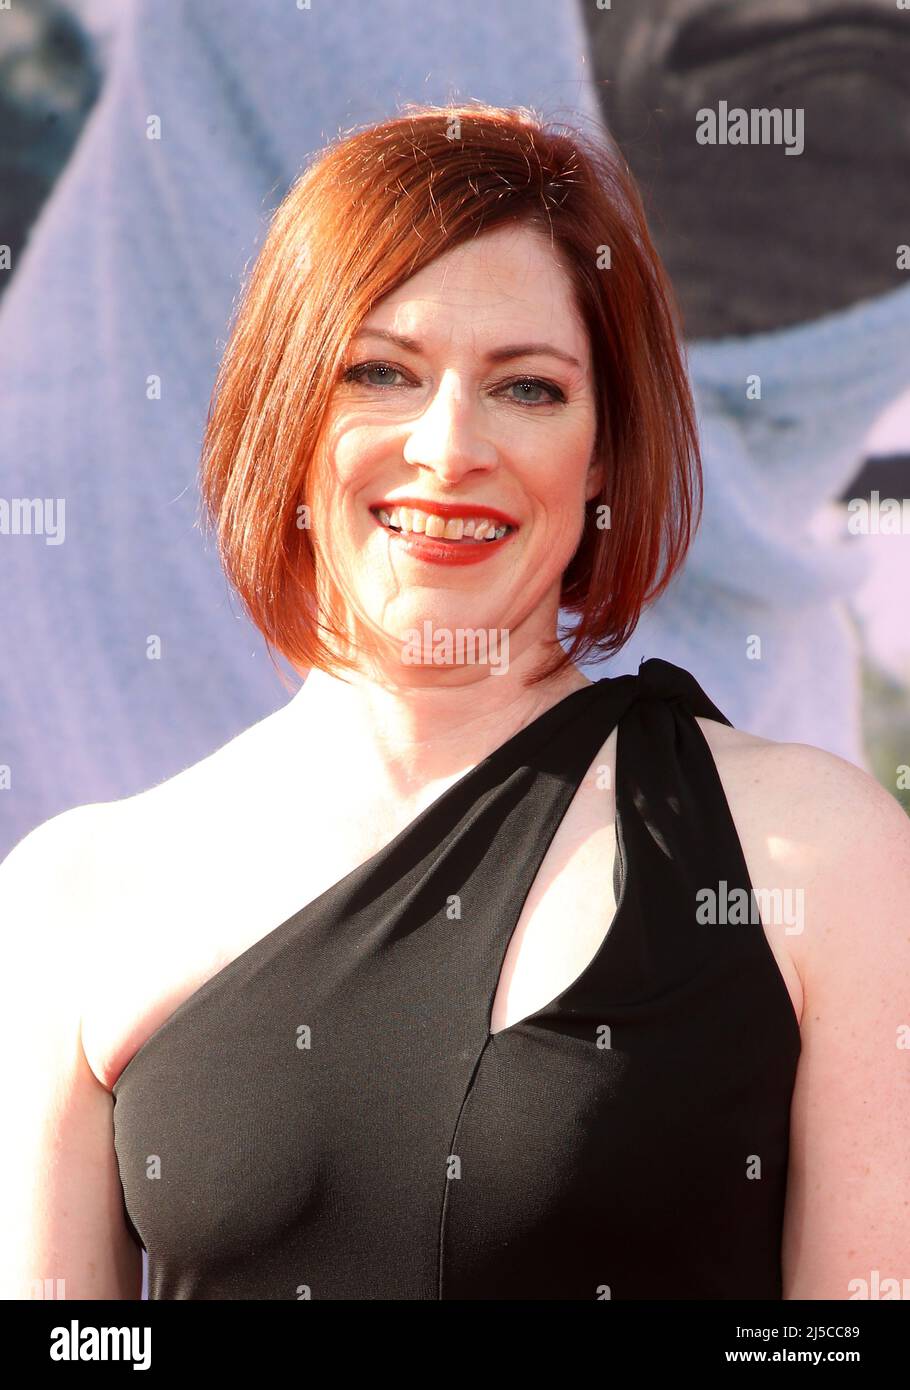 Hollywood, USA. 21st Apr, 2022. Genevieve McGillicuddy, at the 2022 TCM Classic Film Festival Opening Night of E.T. the Extra-Terrestrial at the TCL Chinese Theater in Hollywood, California on April 21, 2022. Credit: Faye Sadou/Media Punch/Alamy Live News Stock Photo